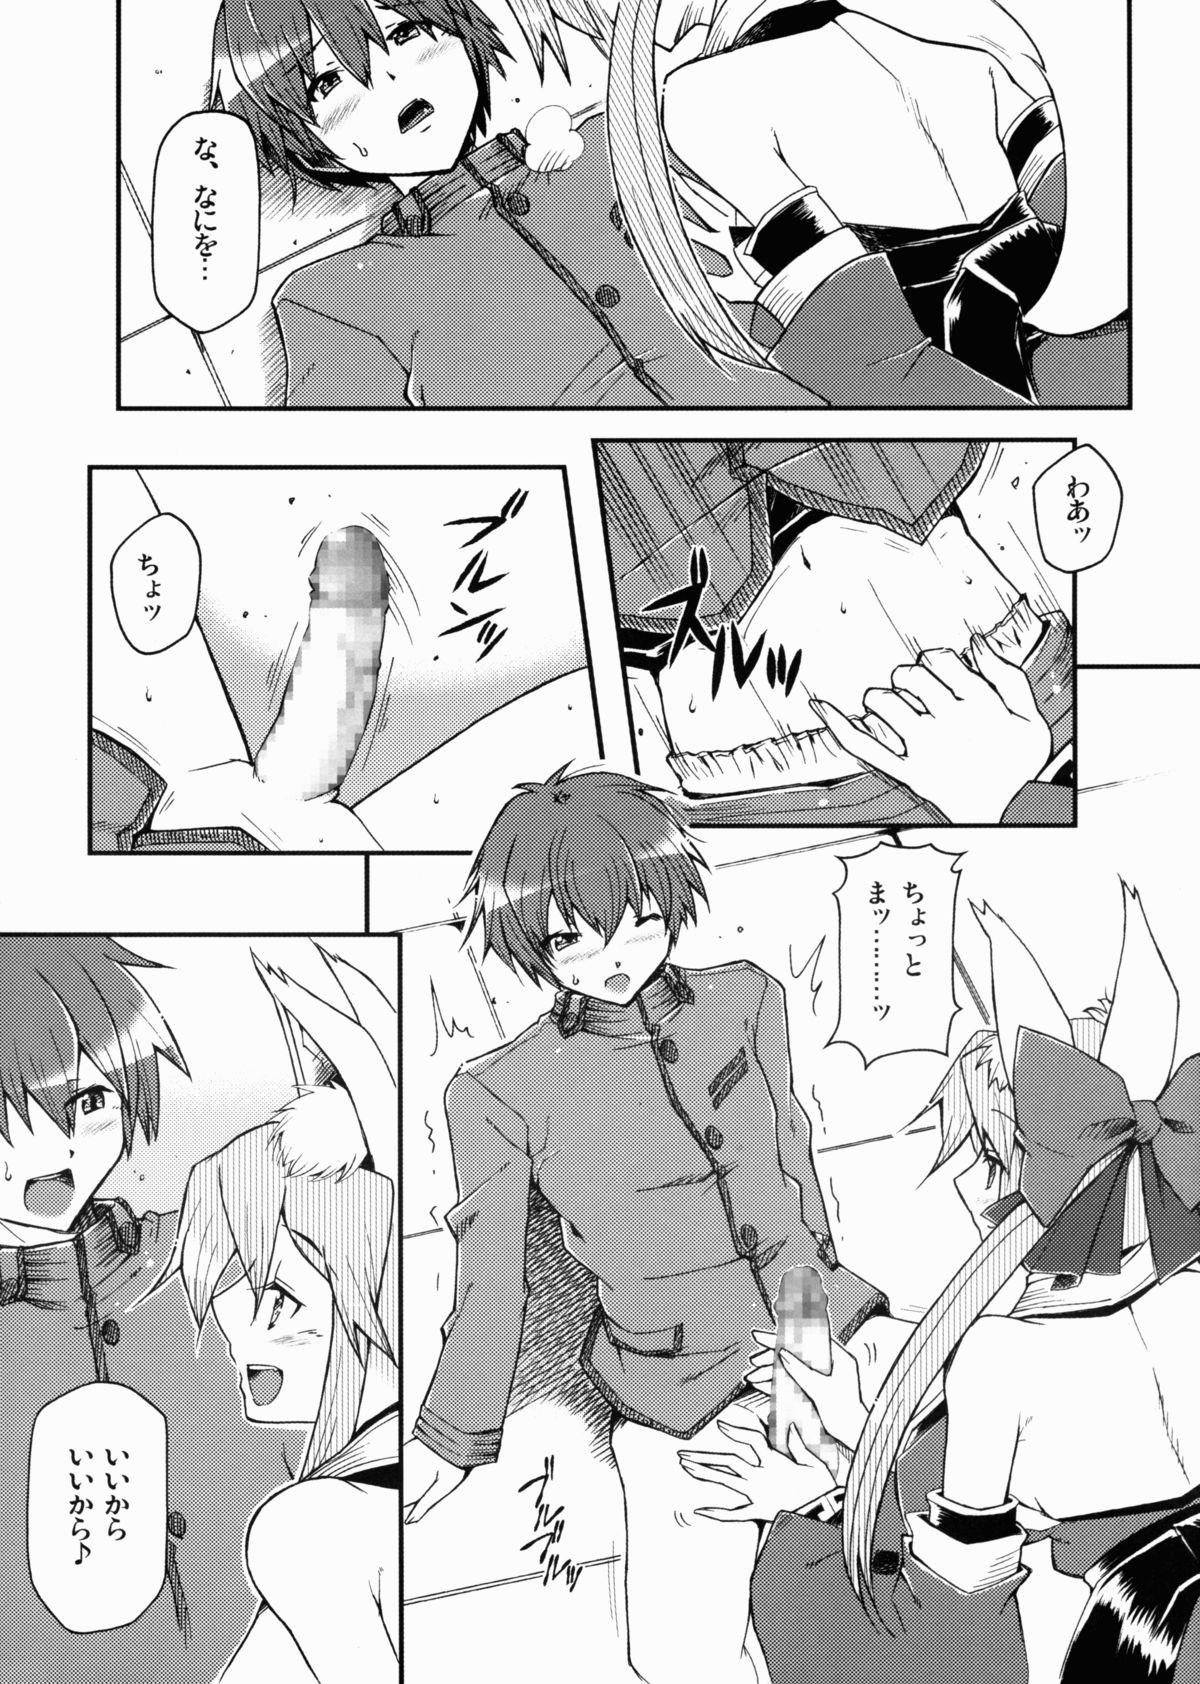 Room 21st CENTURY FOX - Fate extra Dorm - Page 6